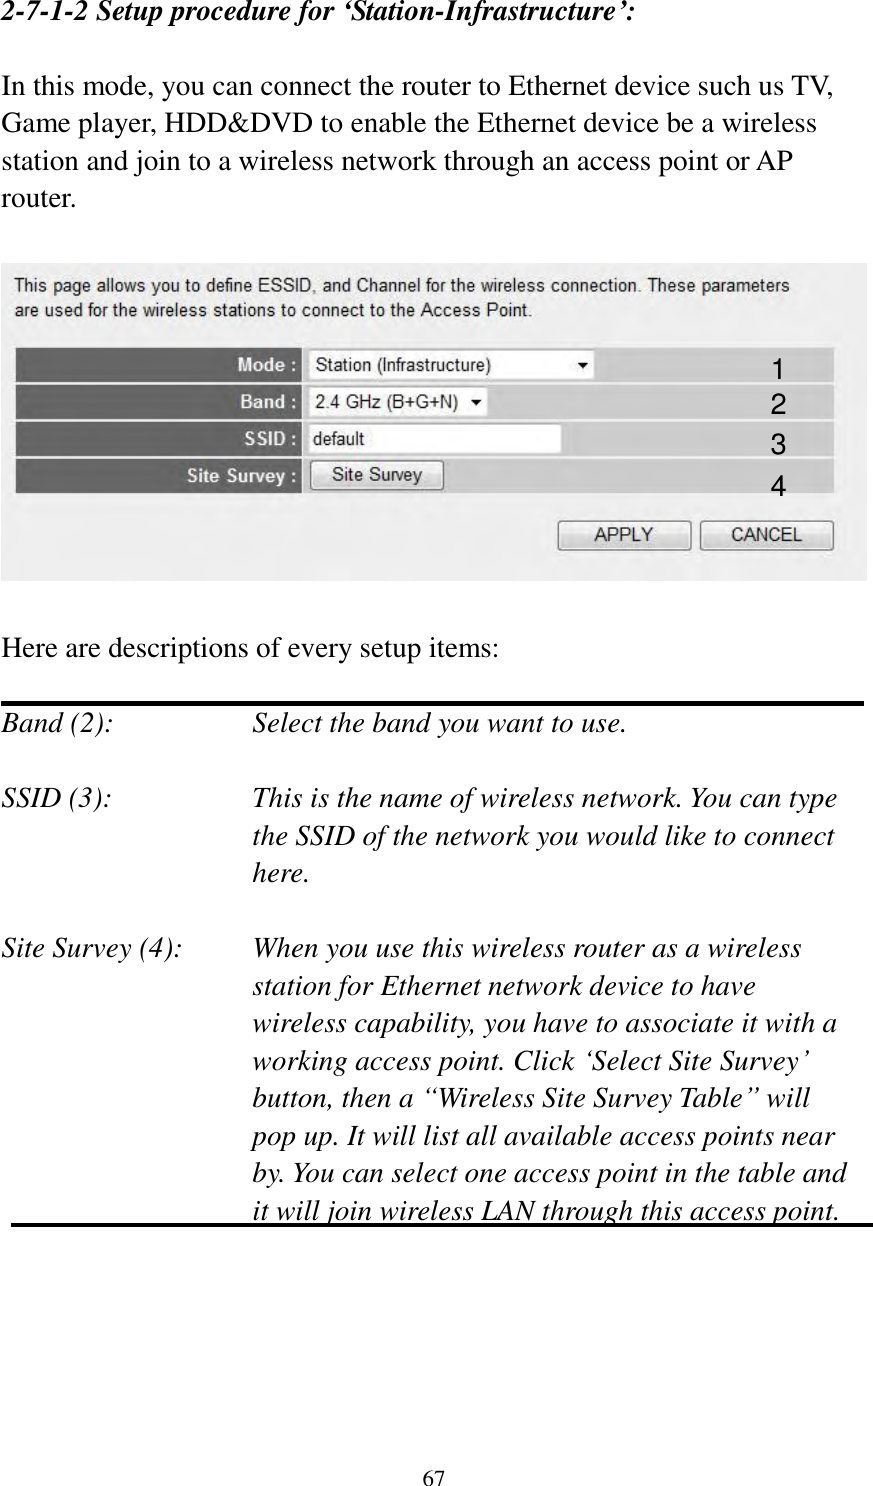 67 2-7-1-2 Setup procedure for ‘Station-Infrastructure’:  In this mode, you can connect the router to Ethernet device such us TV, Game player, HDD&amp;DVD to enable the Ethernet device be a wireless station and join to a wireless network through an access point or AP router.    Here are descriptions of every setup items:  Band (2):  Select the band you want to use.  SSID (3):  This is the name of wireless network. You can type the SSID of the network you would like to connect here.  Site Survey (4):  When you use this wireless router as a wireless station for Ethernet network device to have wireless capability, you have to associate it with a working access point. Click „Select Site Survey‟ button, then a “Wireless Site Survey Table” will pop up. It will list all available access points near by. You can select one access point in the table and it will join wireless LAN through this access point.      1 2 3 4 